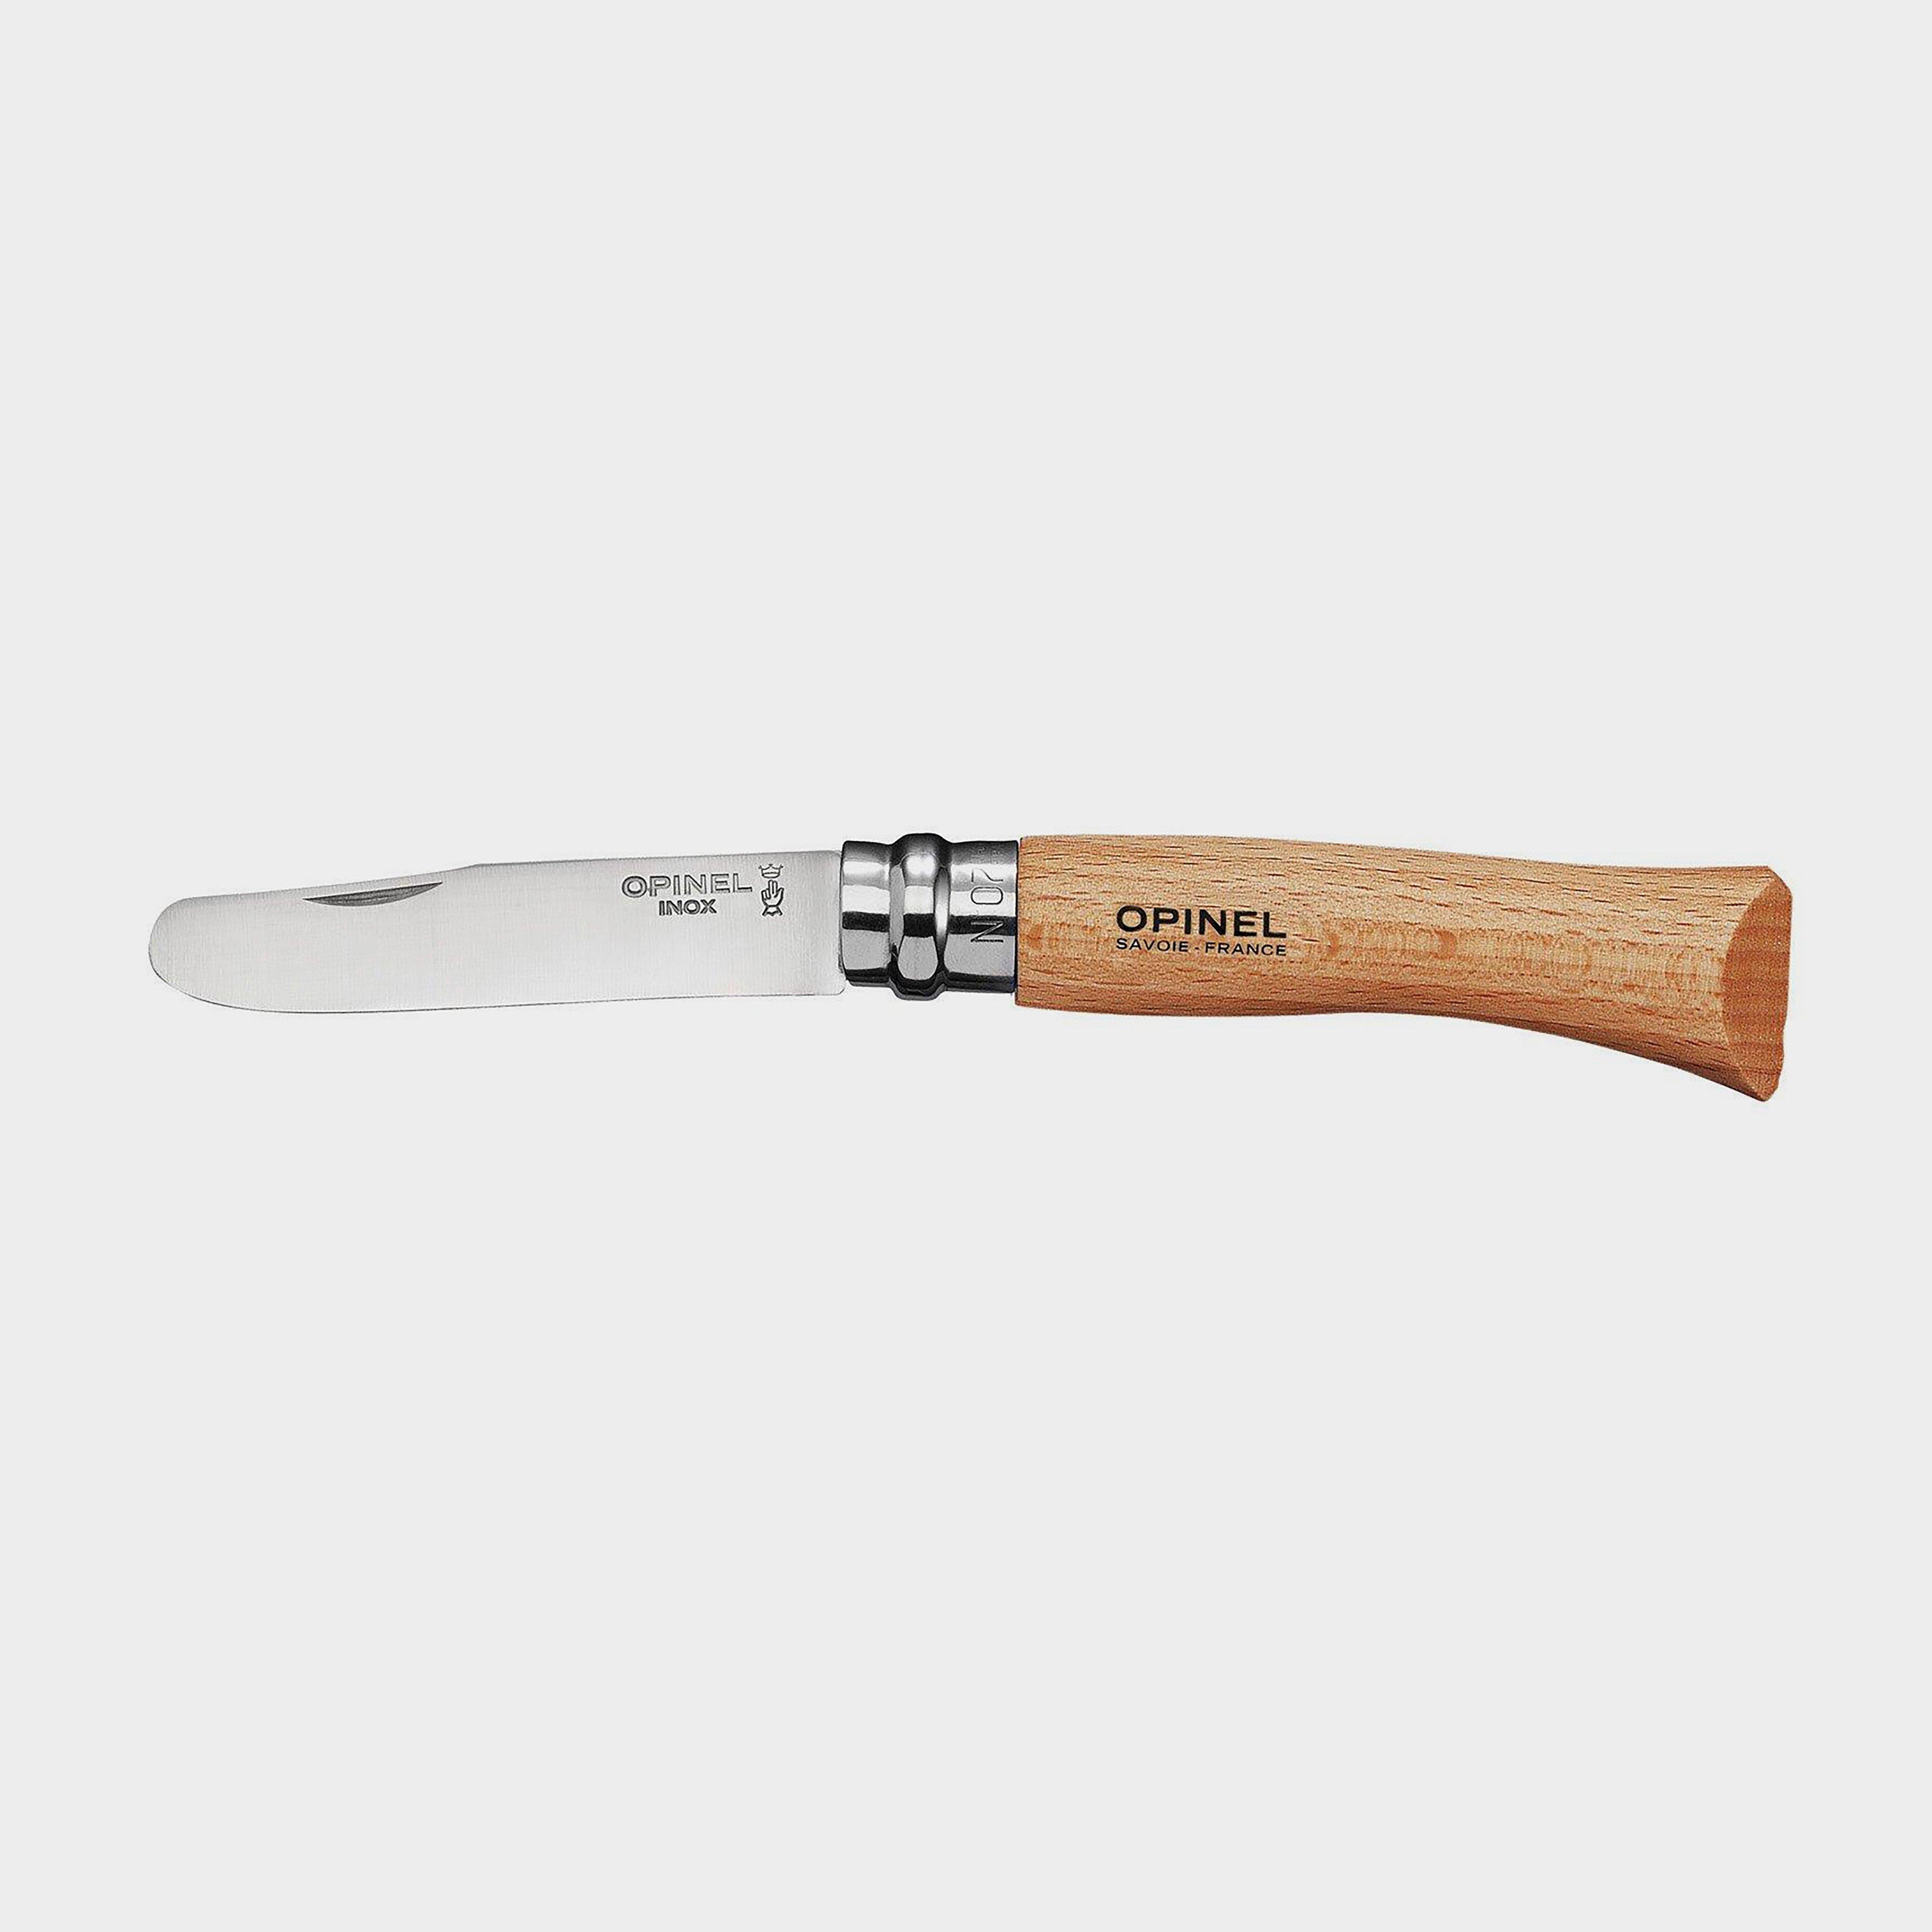 Opinel No.7 My First Opinel Safety Knife - Browqn/knife  Browqn/knife